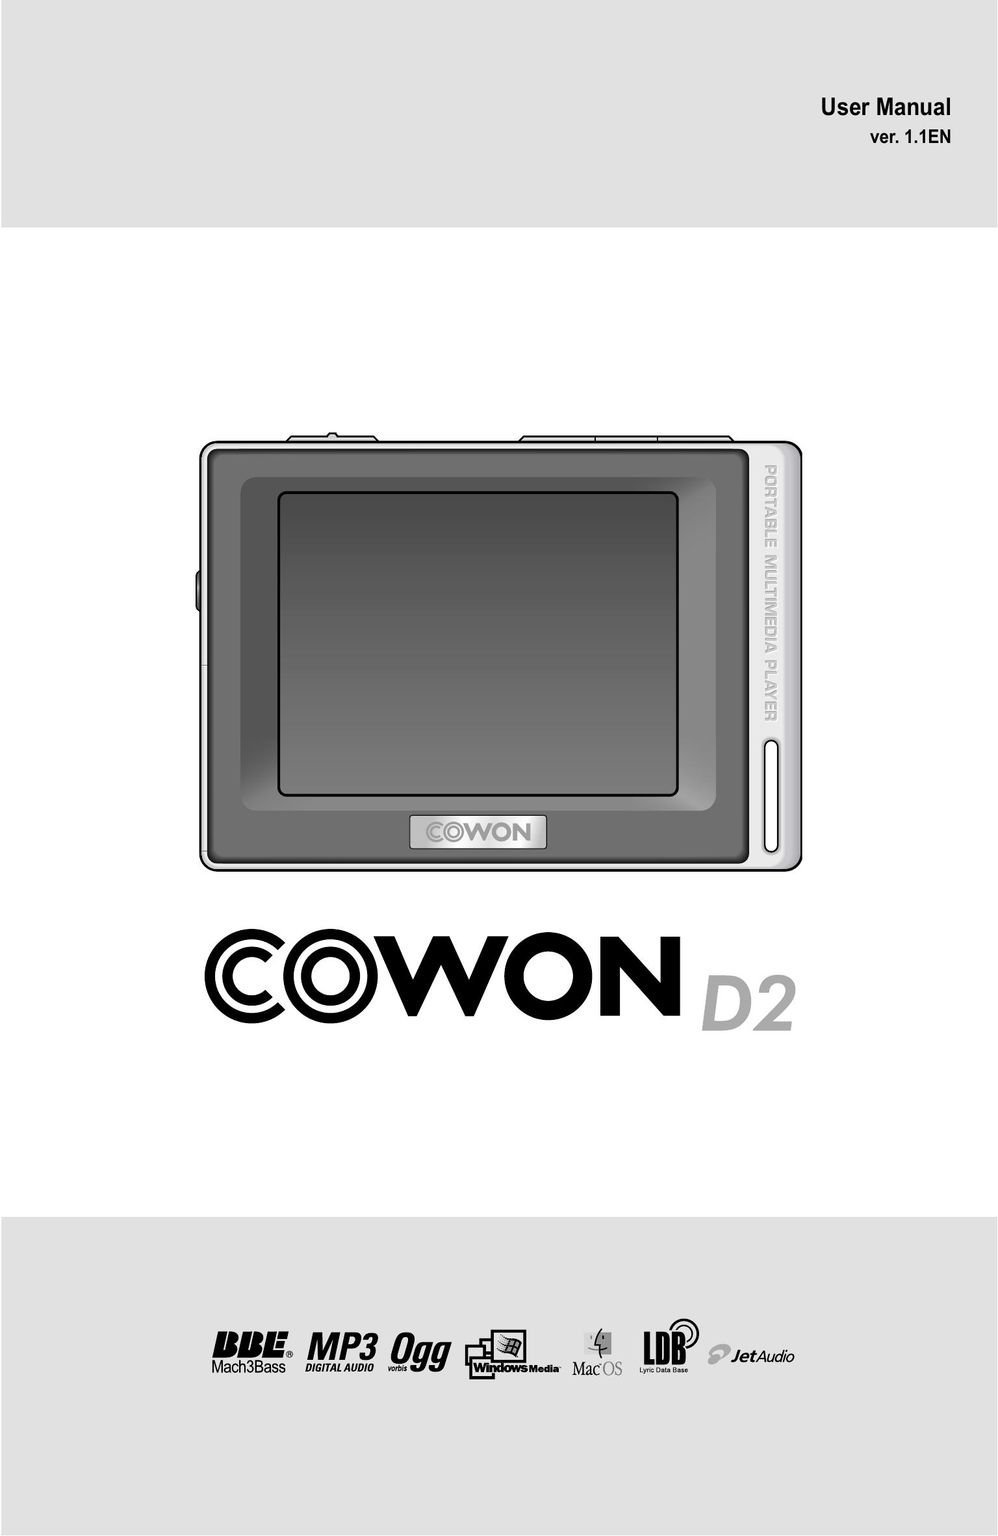 Cowon Systems COWON D2 MP3 Player User Manual